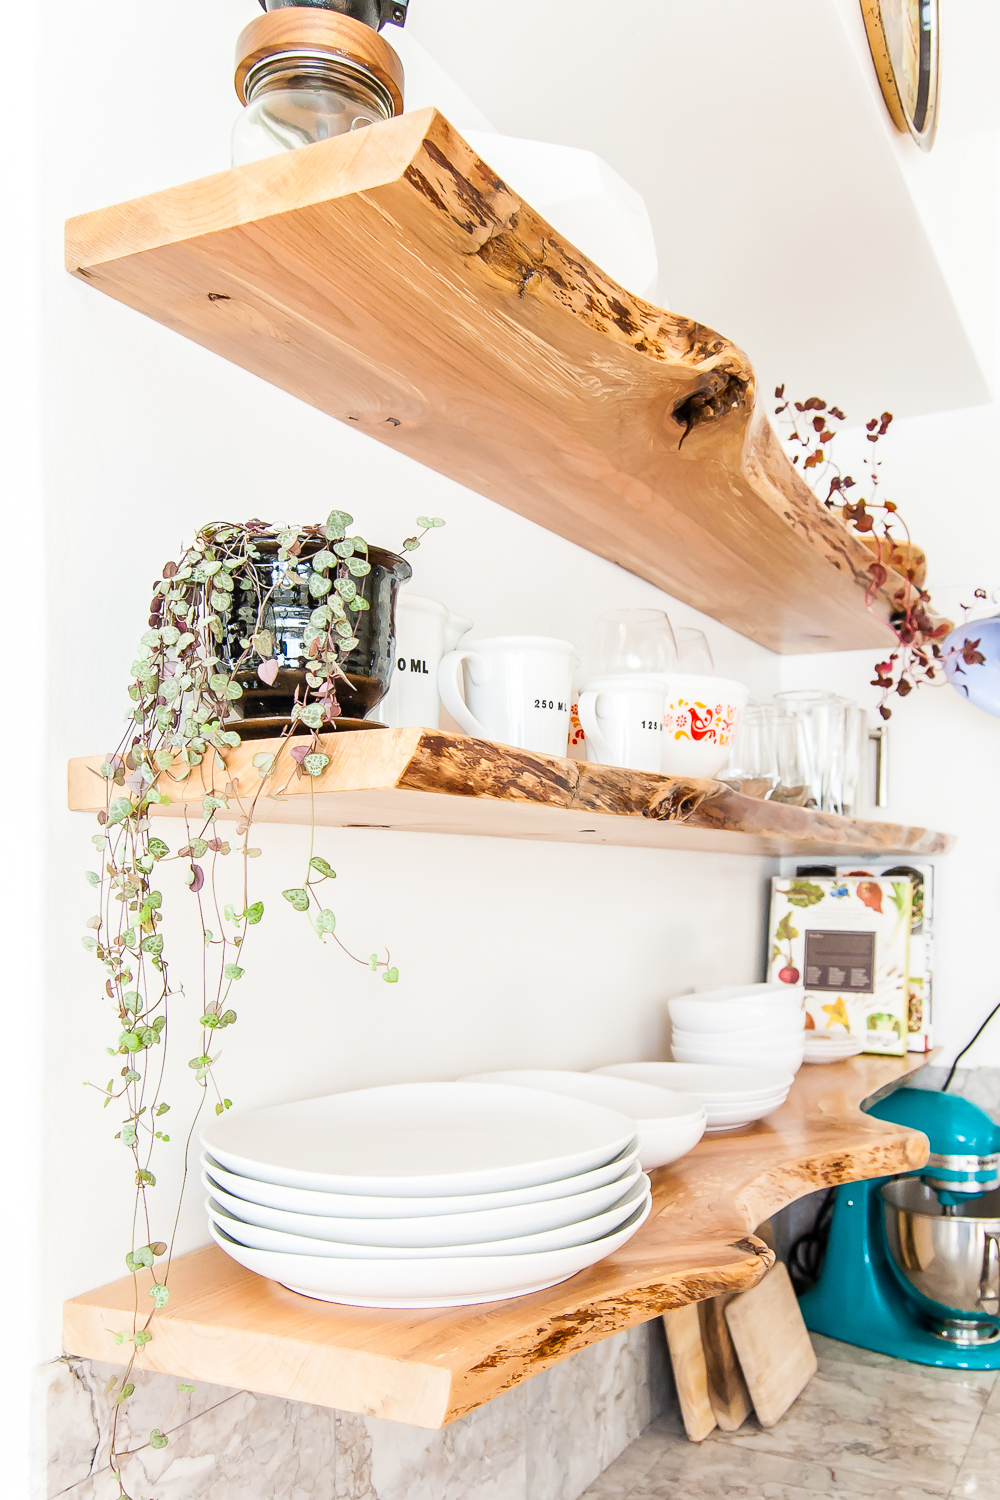 Want to build your own DYI floating shelves? Here are 7 different tutorials that show you how.